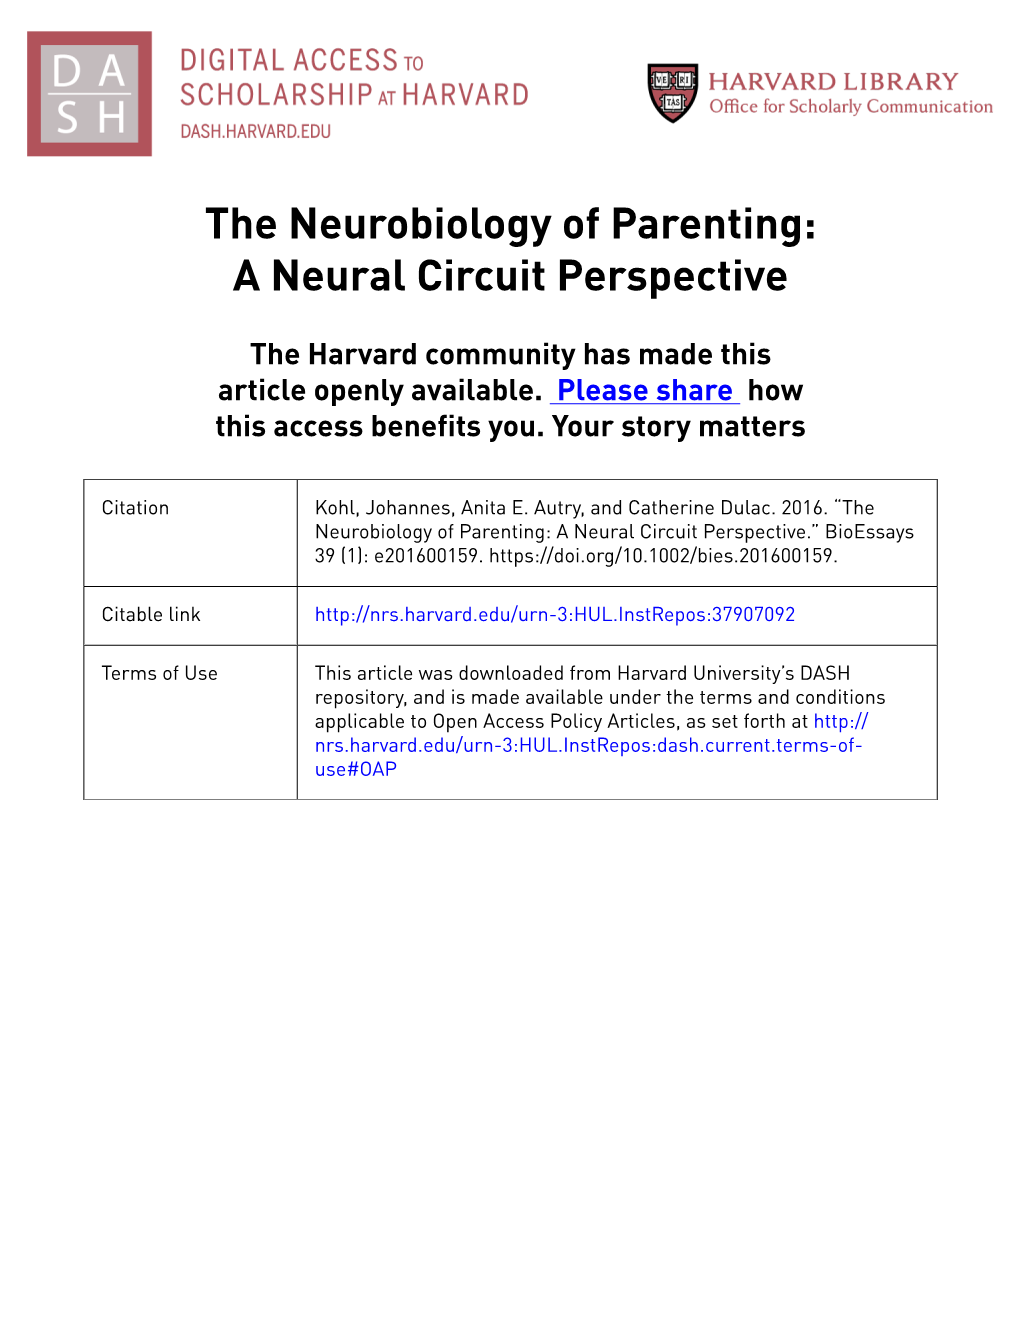 The Neurobiology of Parenting: a Neural Circuit Perspective